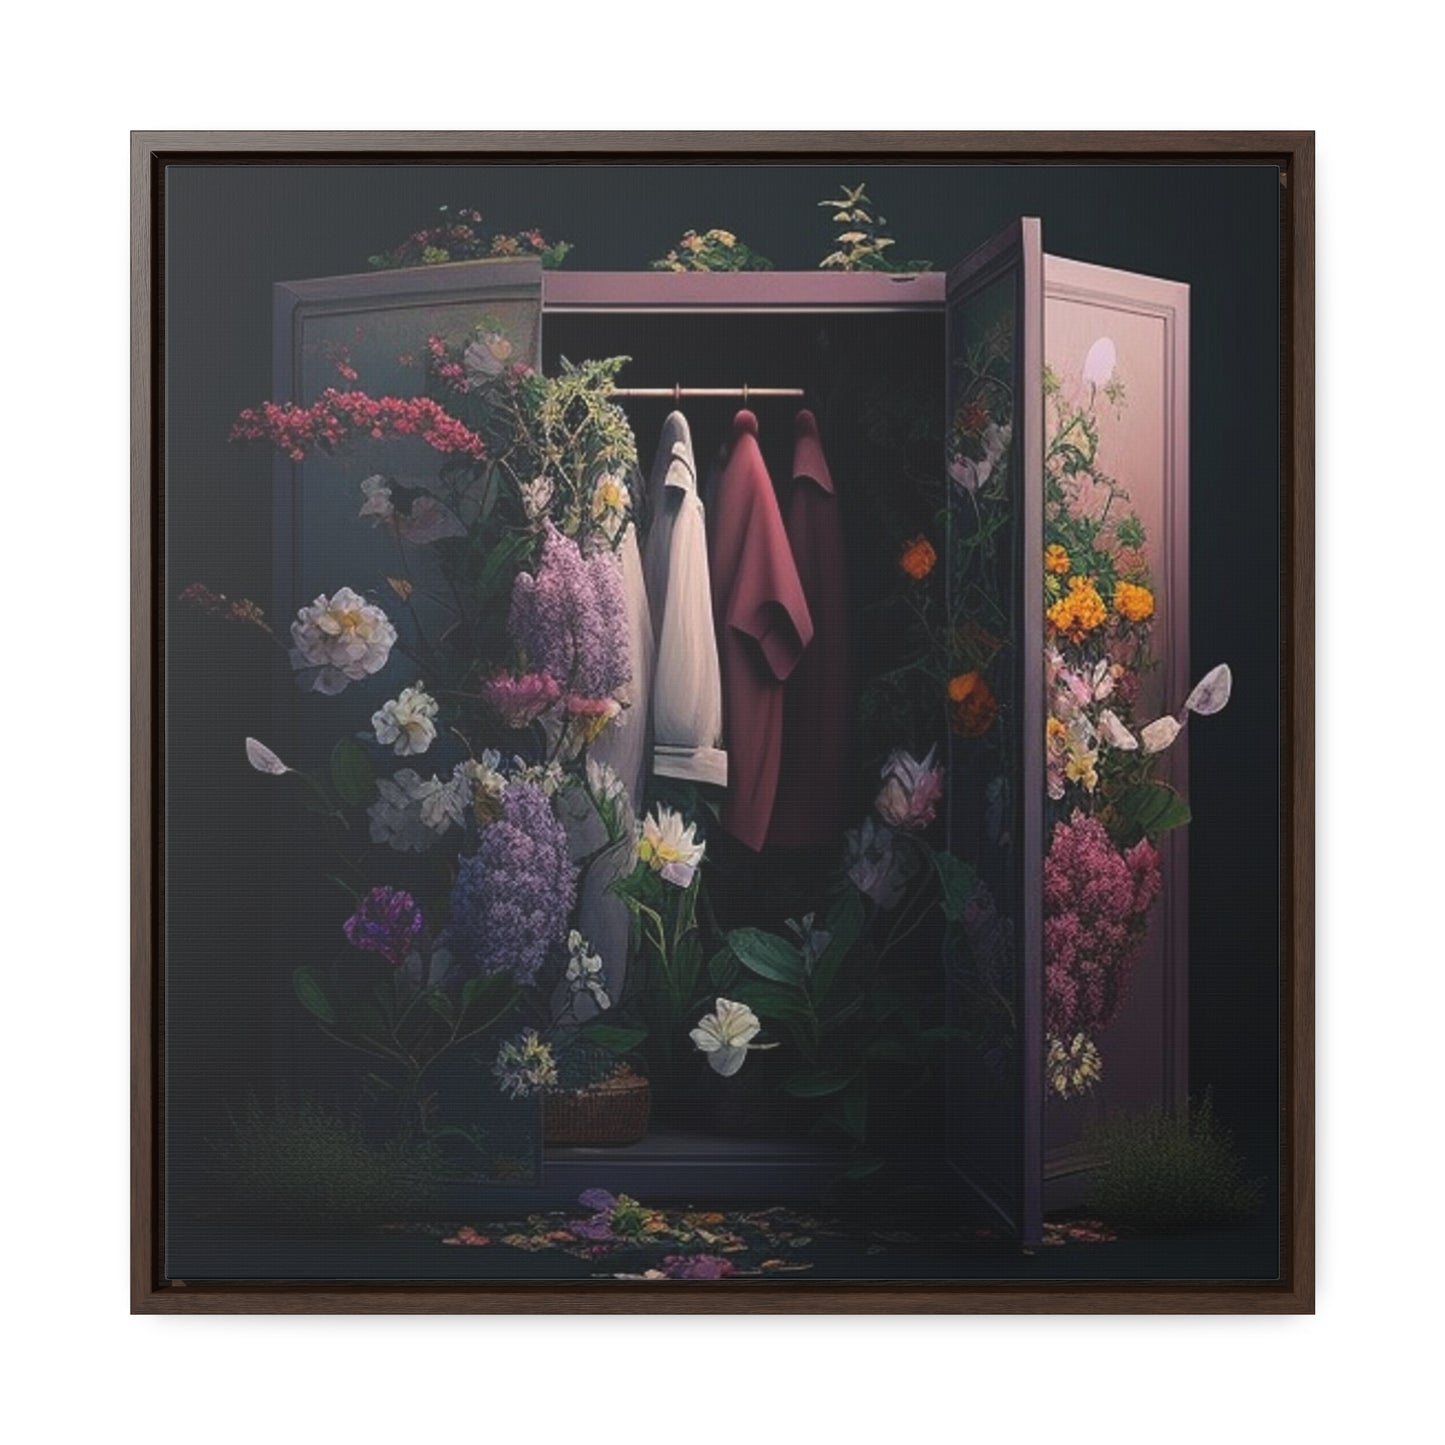 Gallery Canvas Wraps, Square Frame A Wardrobe Surrounded by Flowers 2